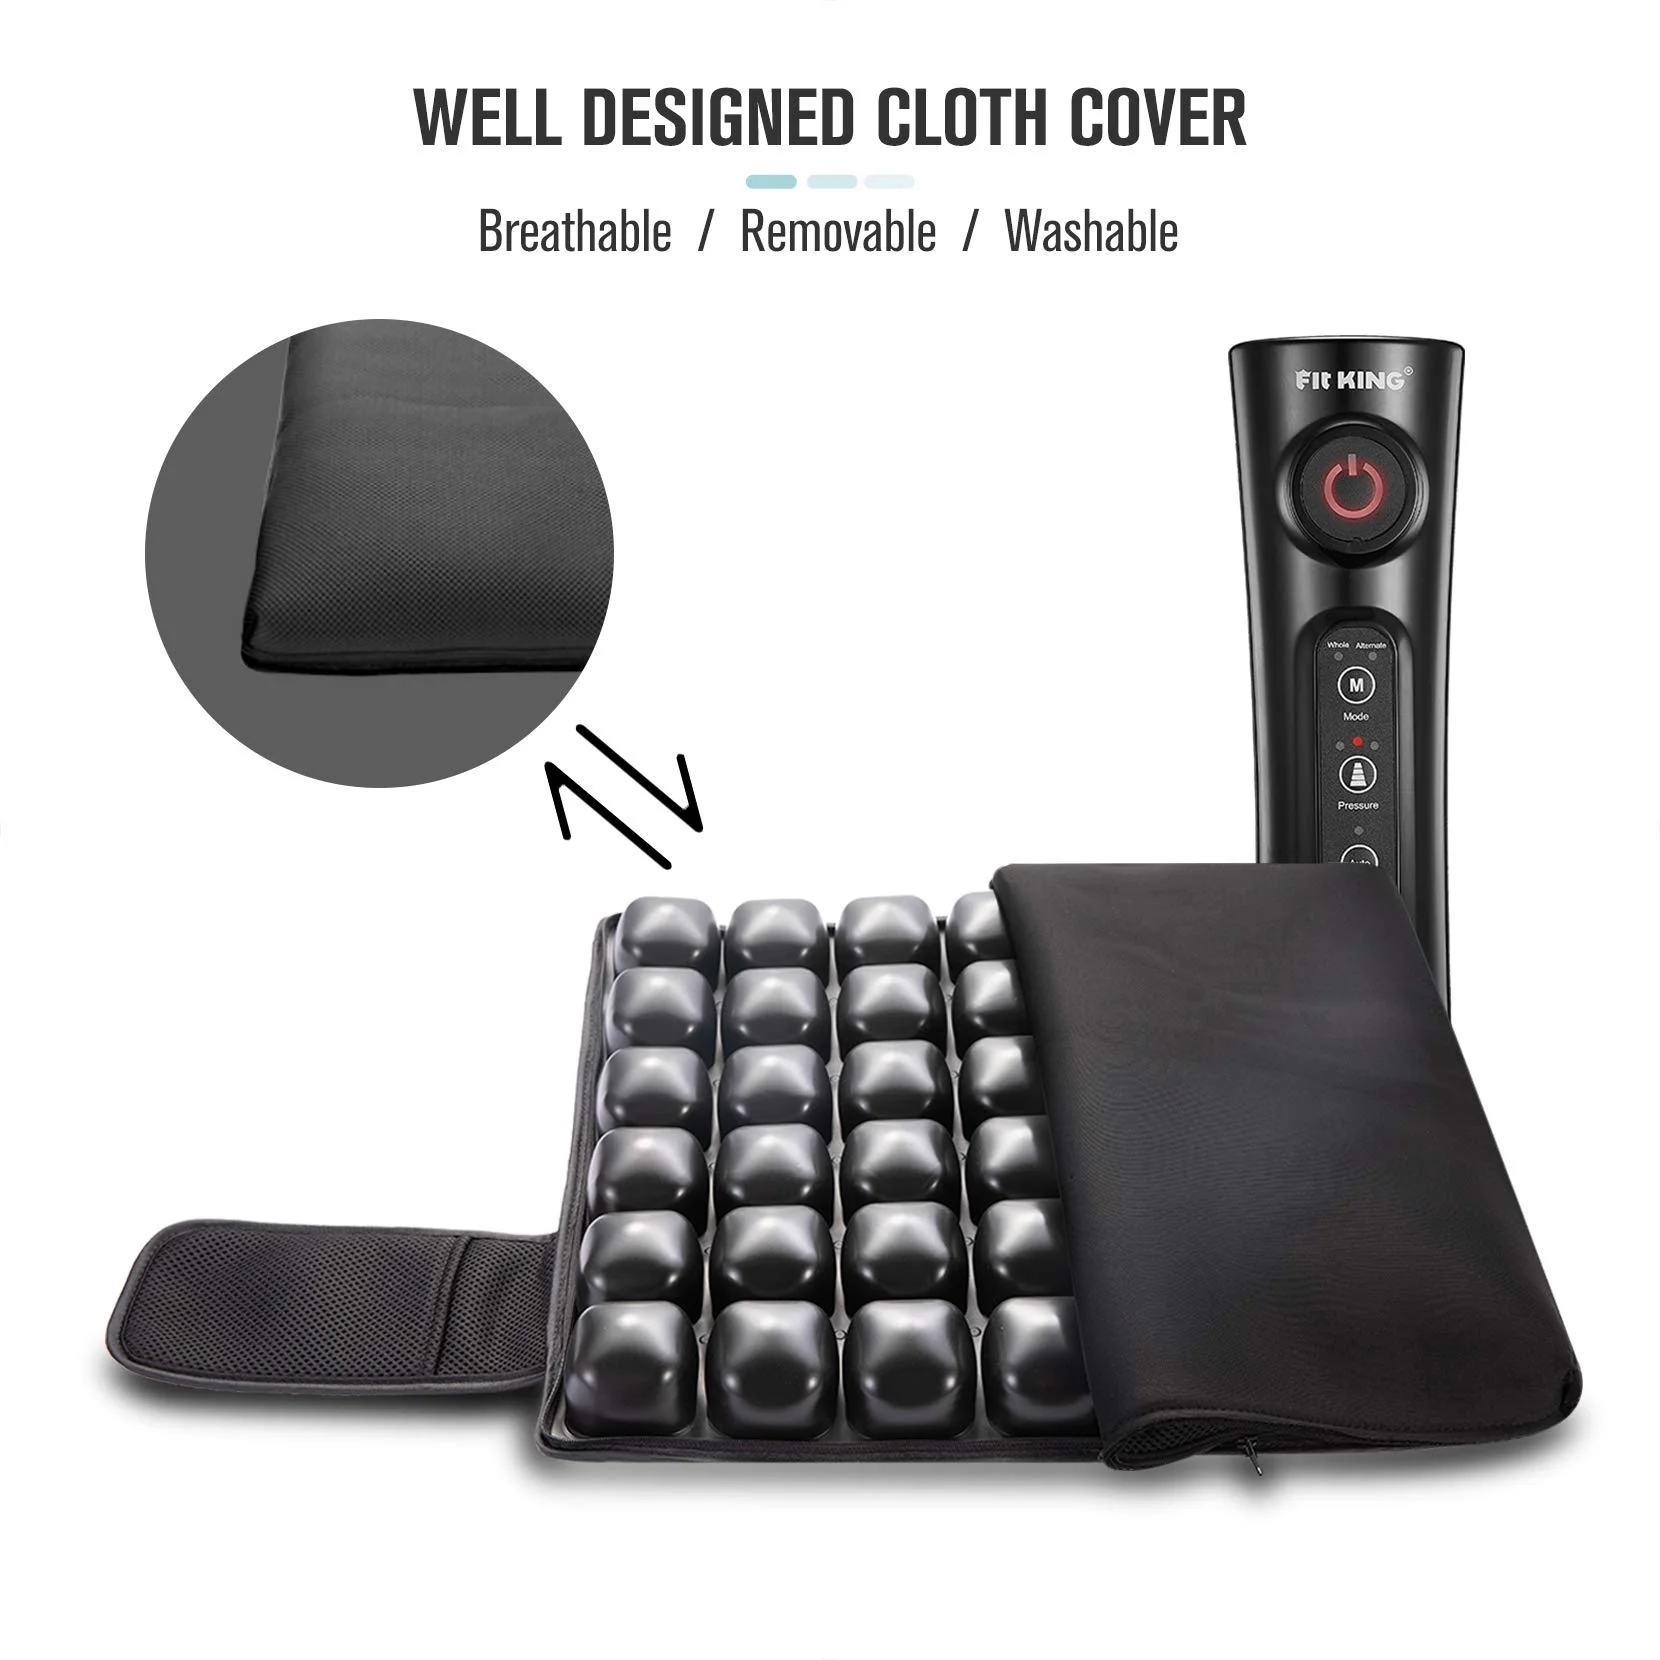 
FIT KING Rechargeable Electric Inflatable Air Seat Cushion with Massage Mode for Wheelchair Office Chair and Car Seat 